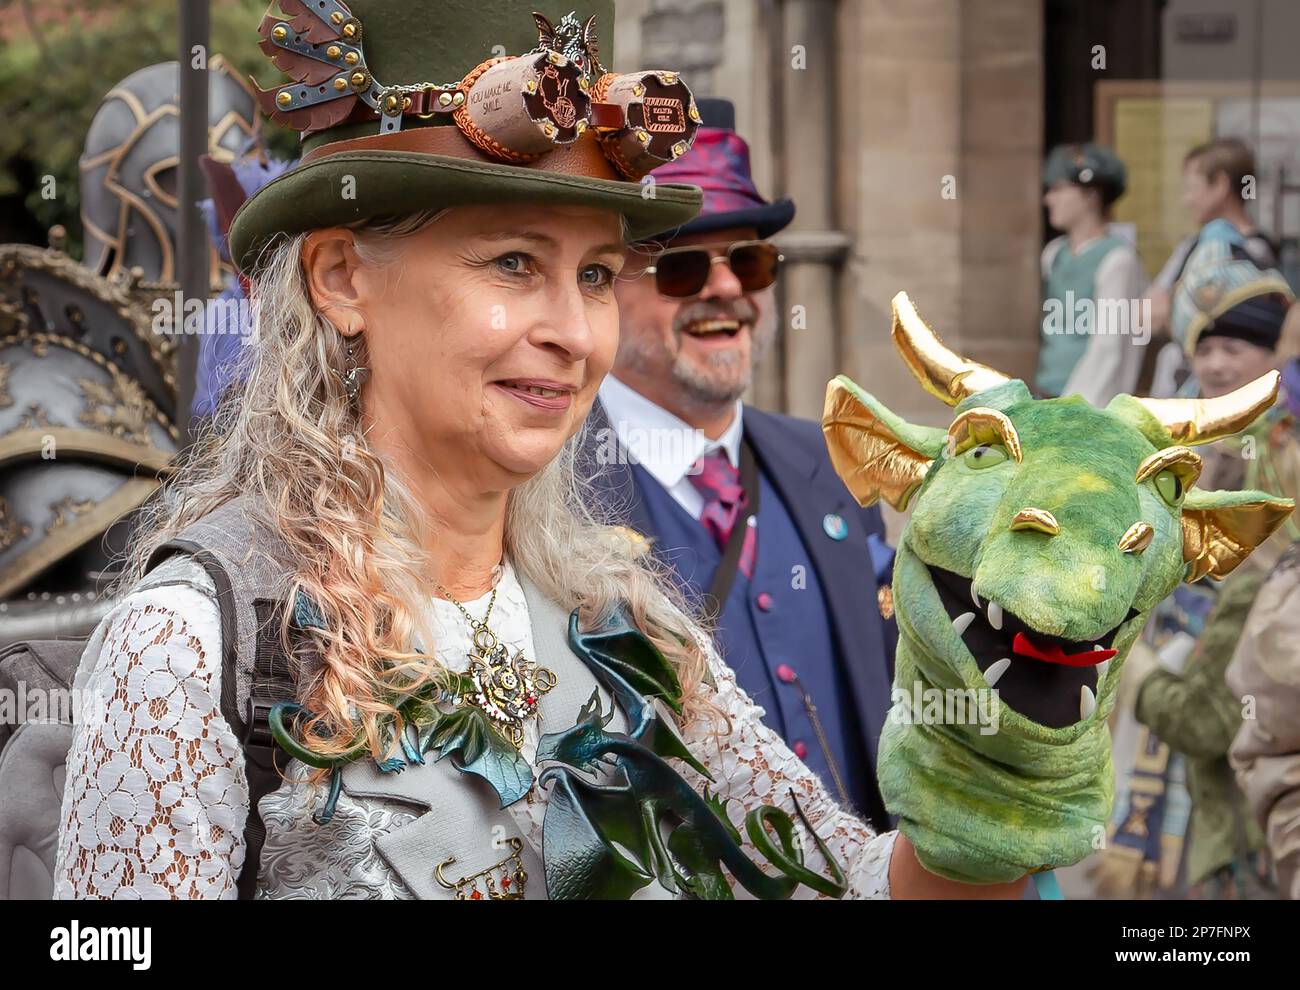 A female steampunk holding up a dragon head puppet. Stock Photo